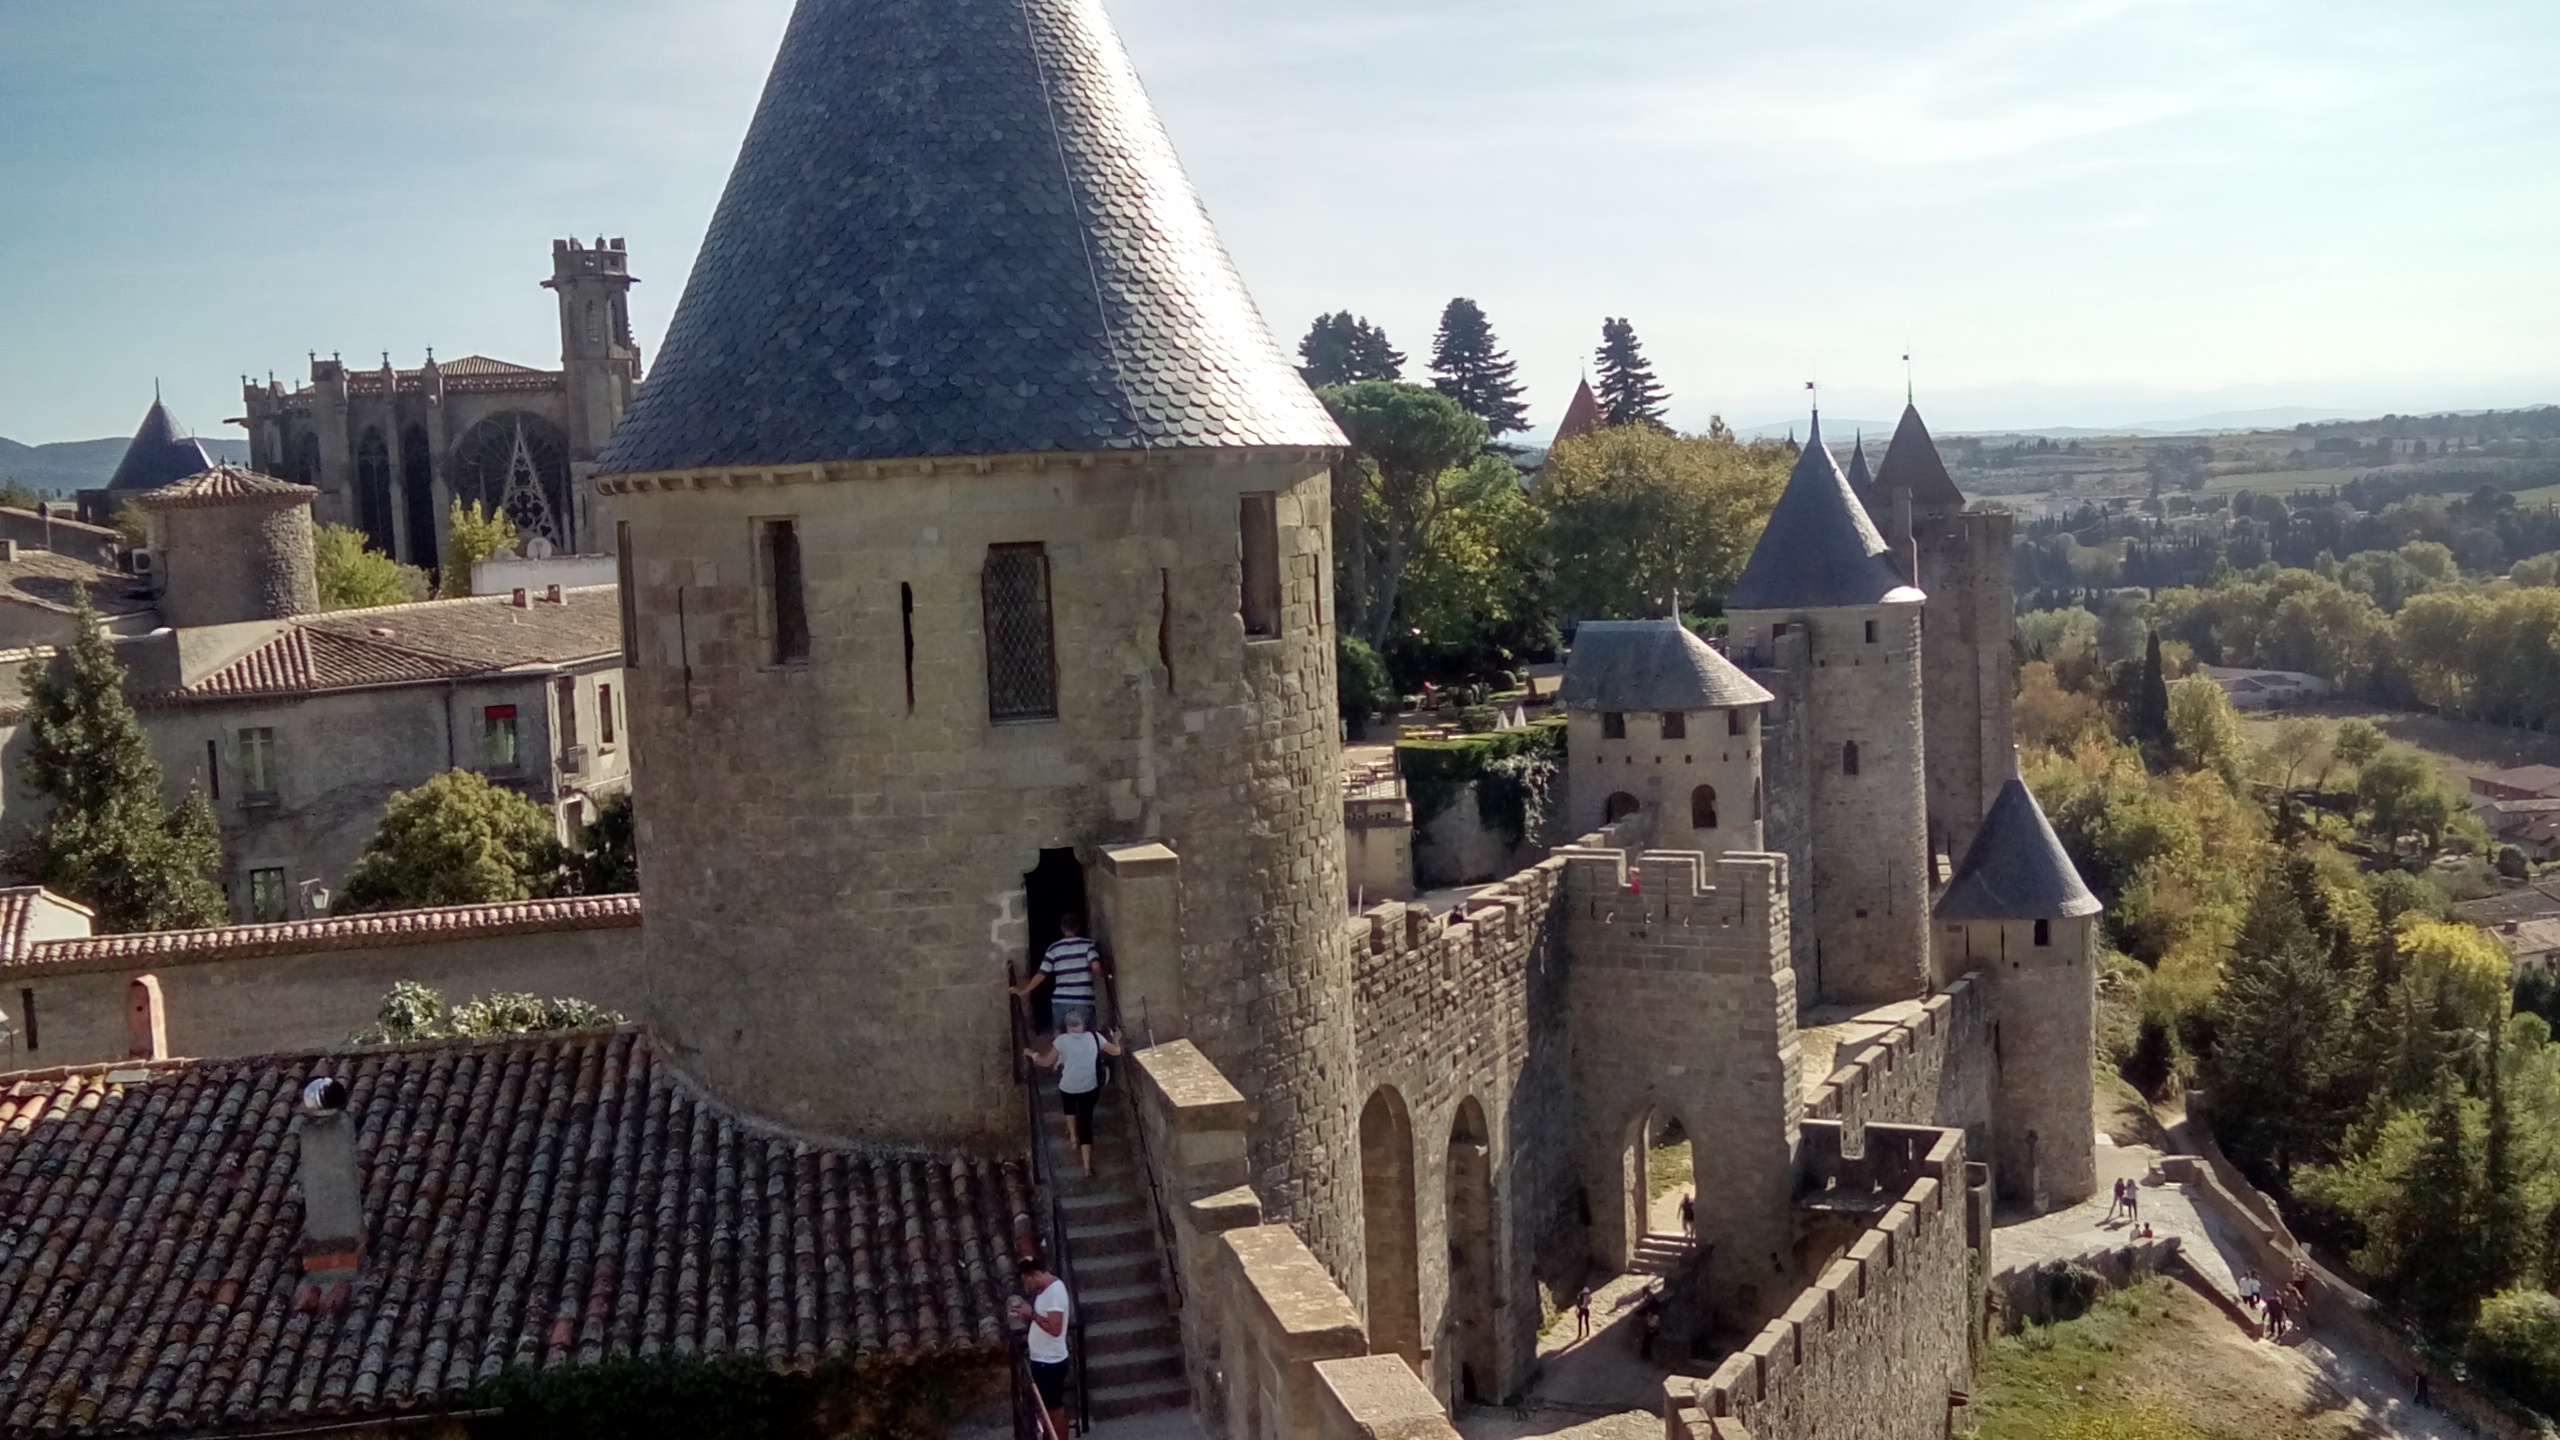 The fortified village of Carcassonne